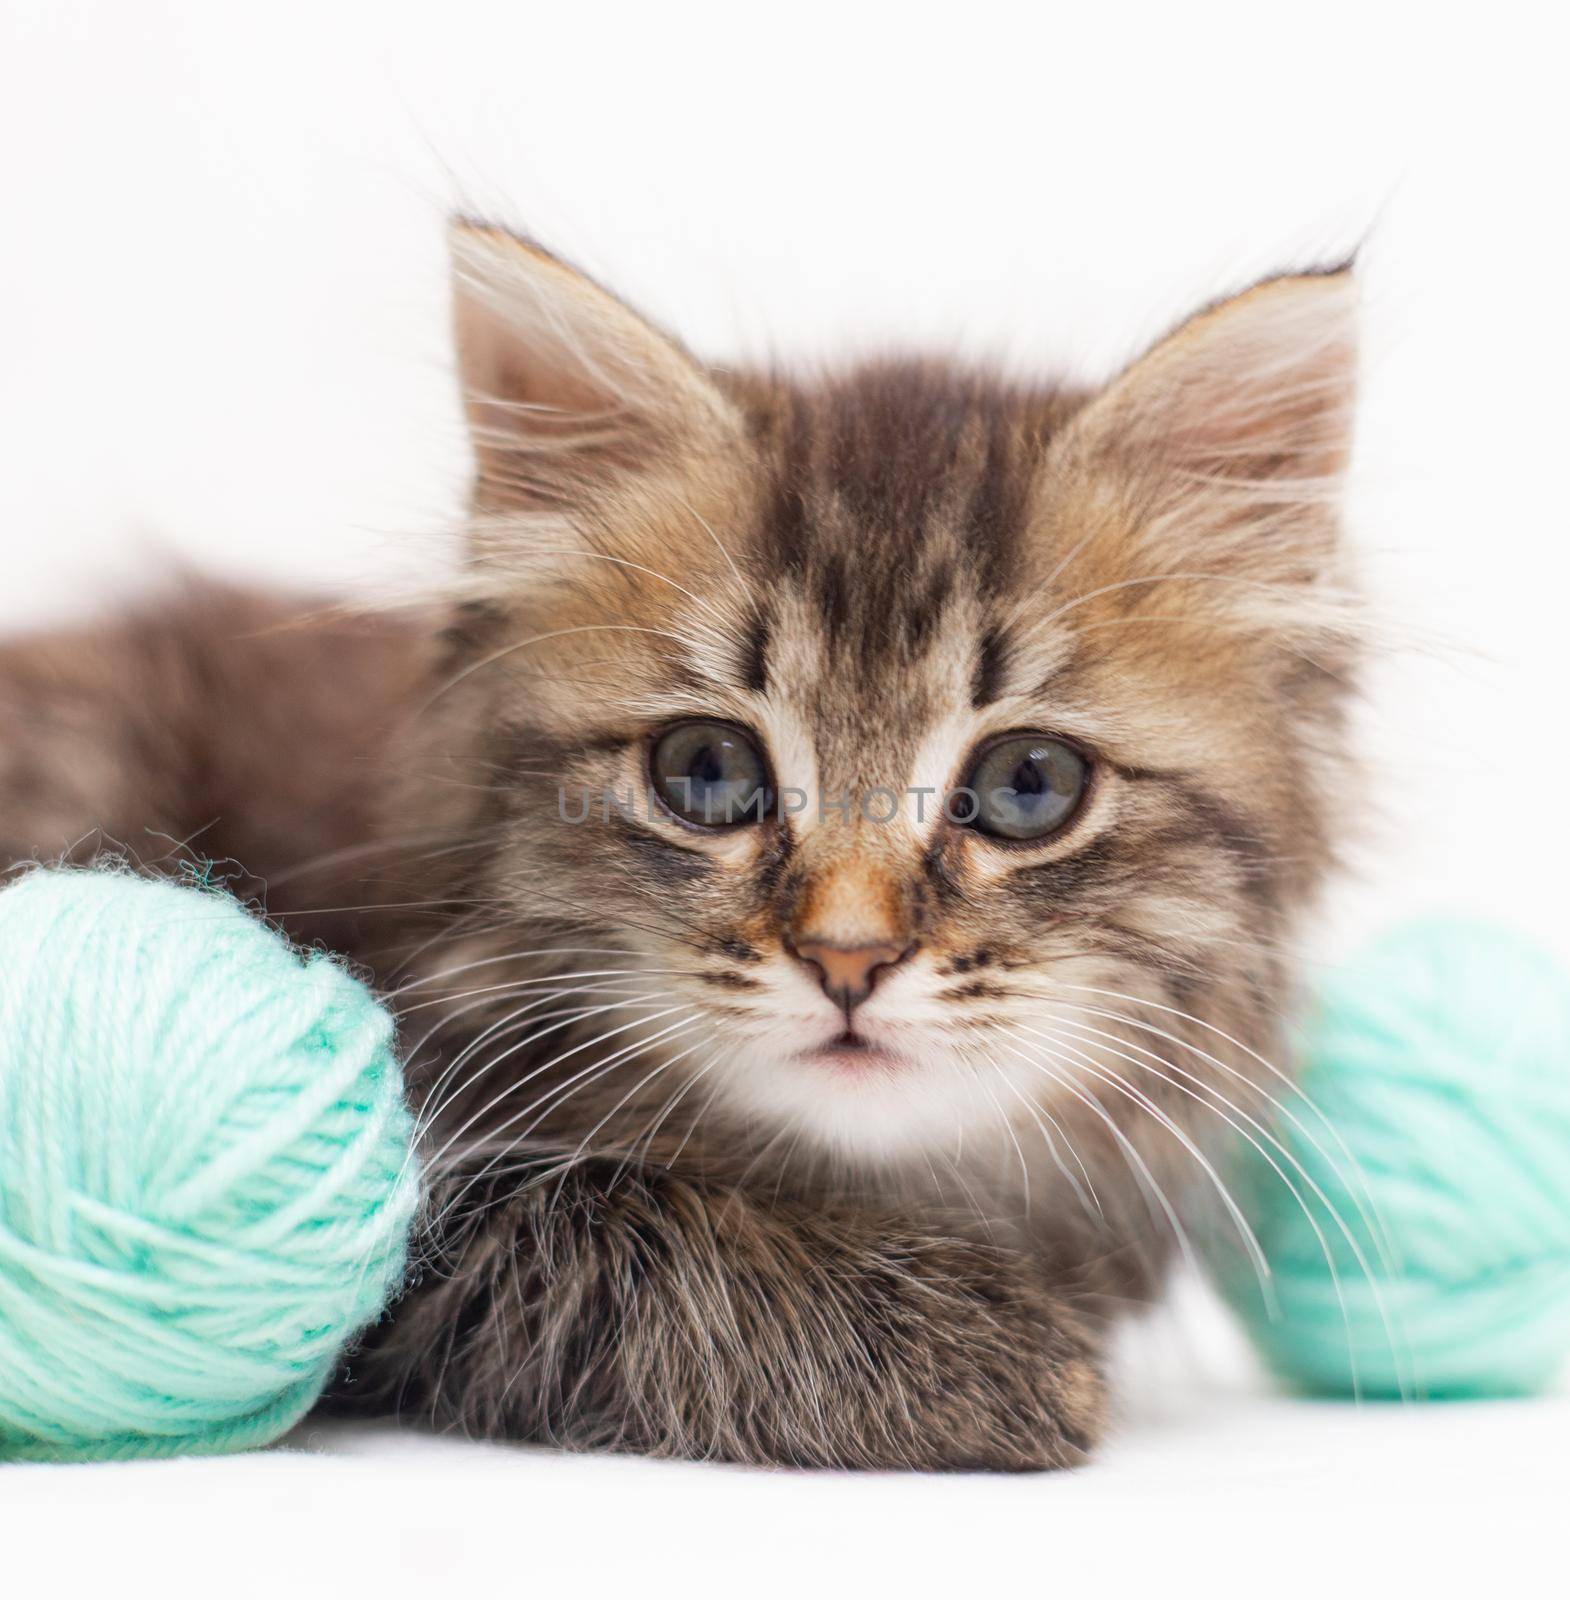 Striped cat with blue balls, skeins of thread on a white bed. An article about kittens. An article about pets. A curious little kitten looking into the camera by alenka2194